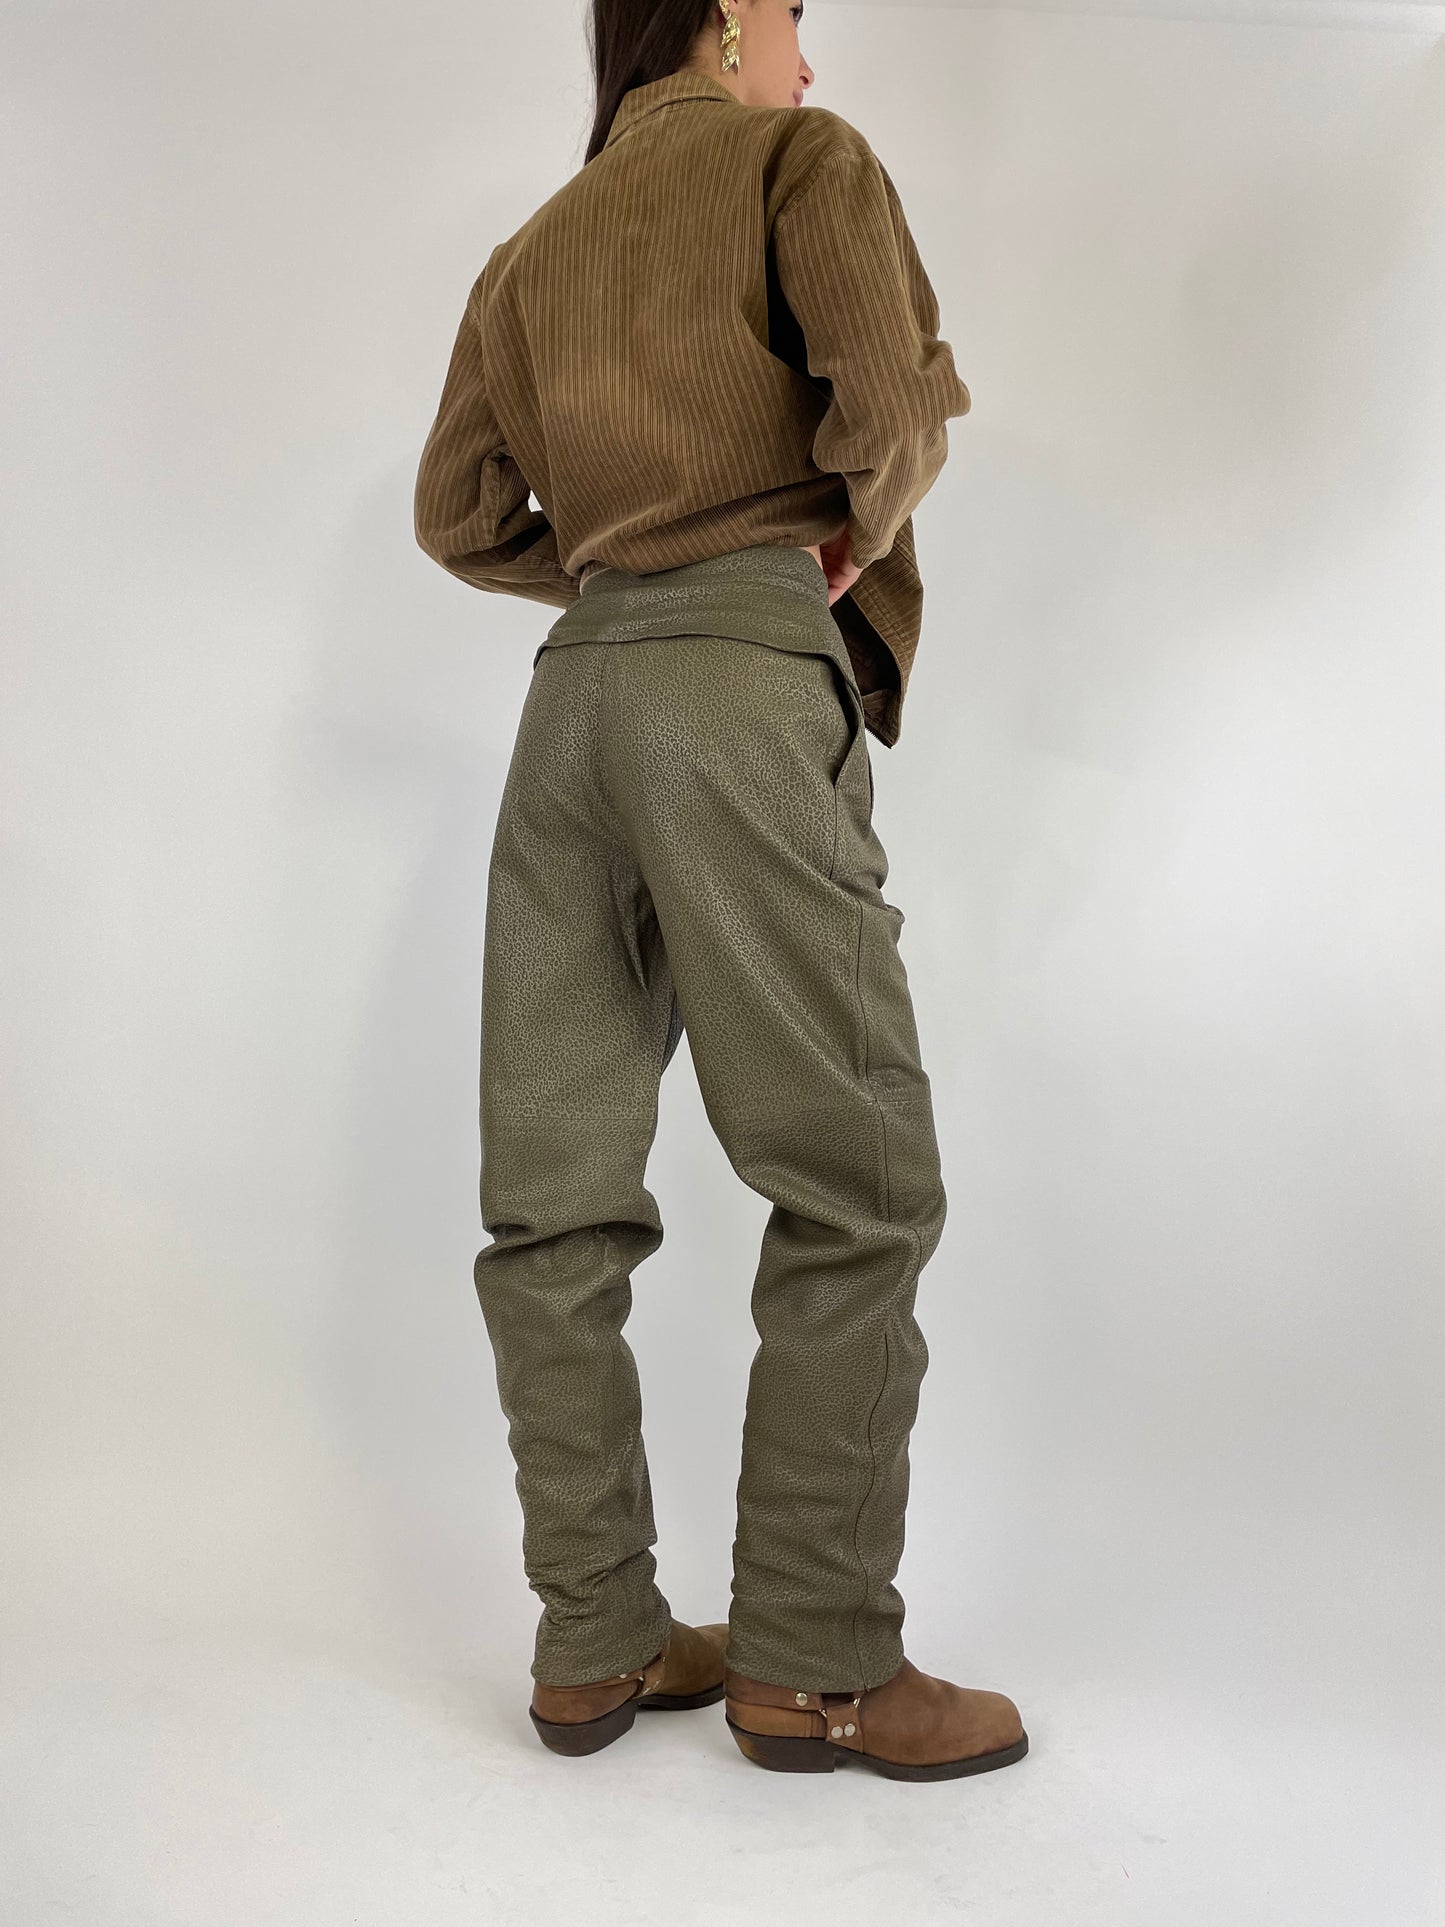 Genny trousers - Genuine leather